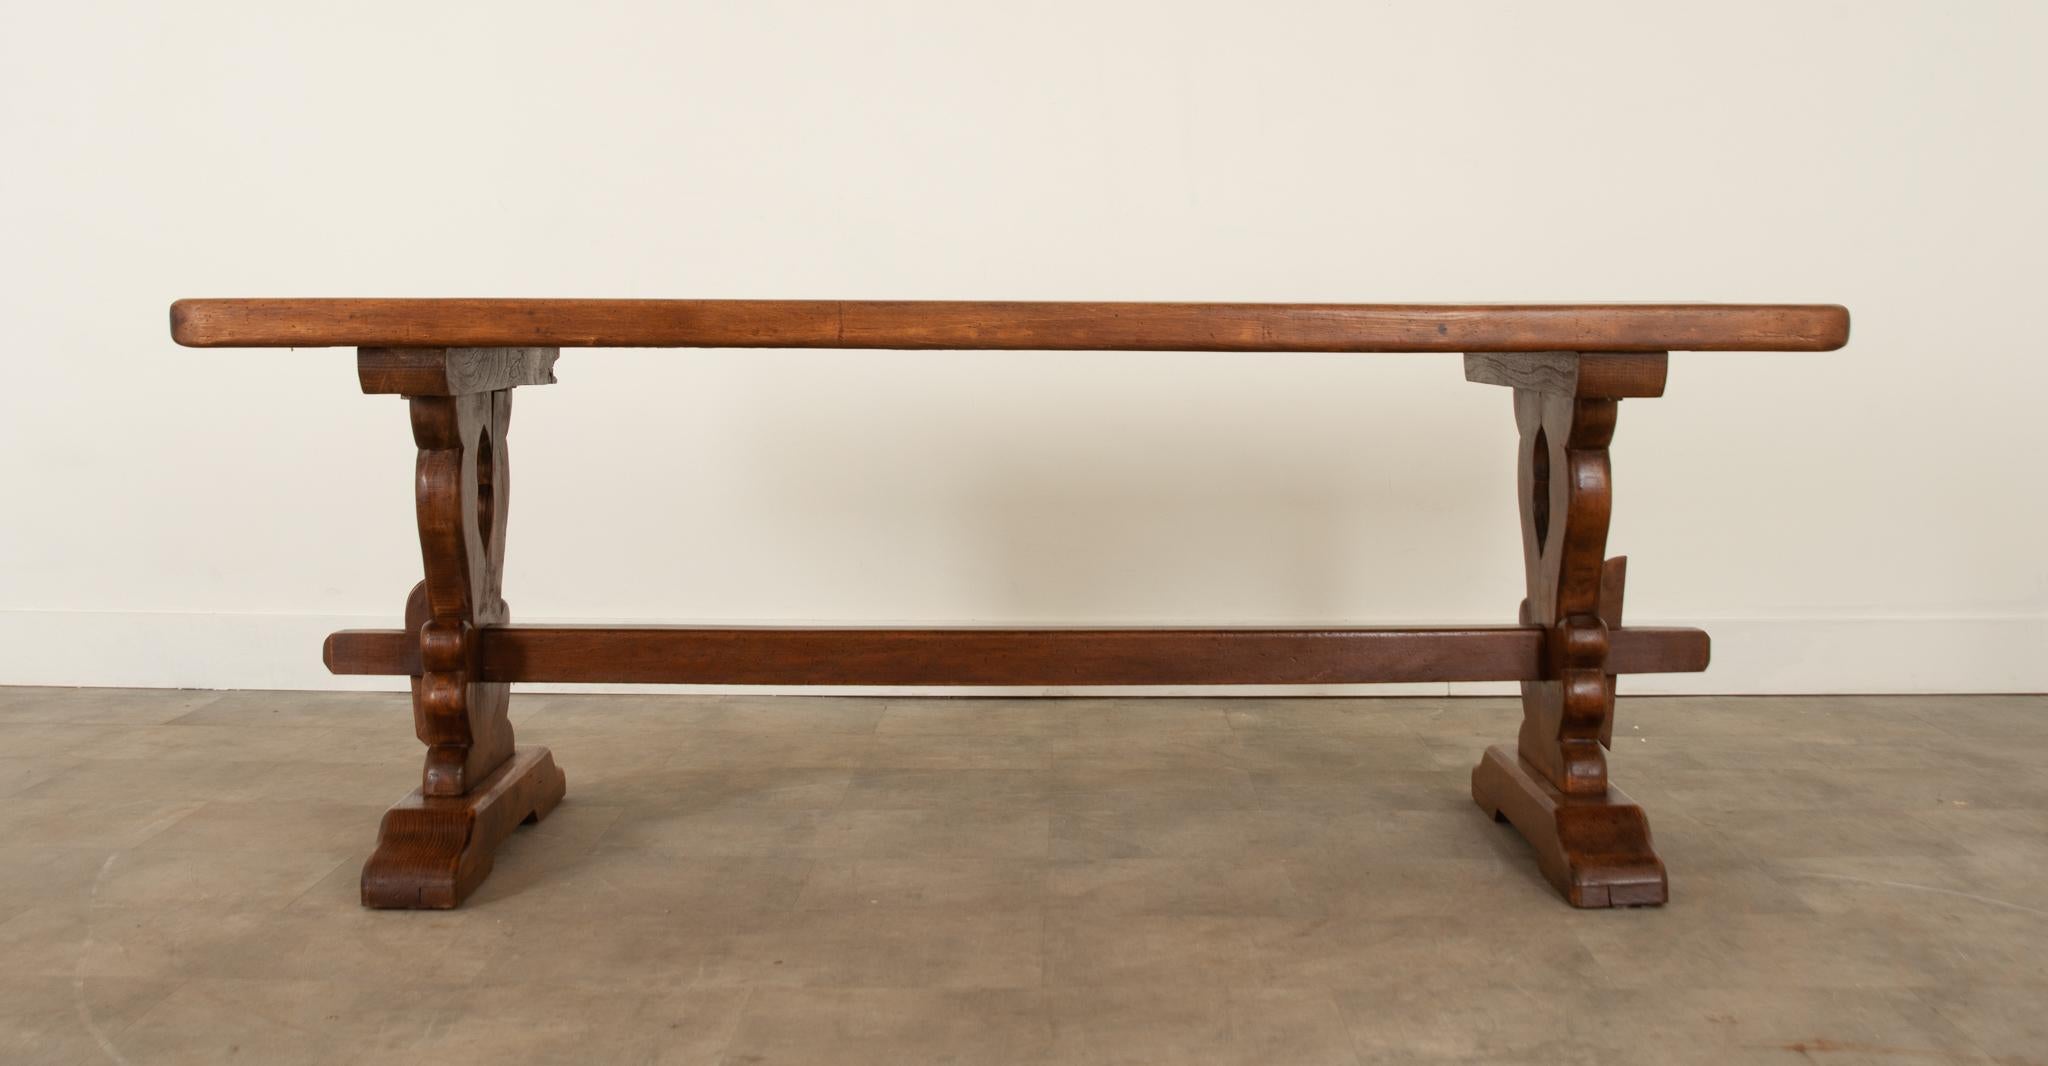 This French solid oak trestle base table is perfect for your casual dining experience. The 2-1/4” thick top is the perfect scale over its shaped and pierced base. The long stretcher in the center of the bases adds support and contributes the over